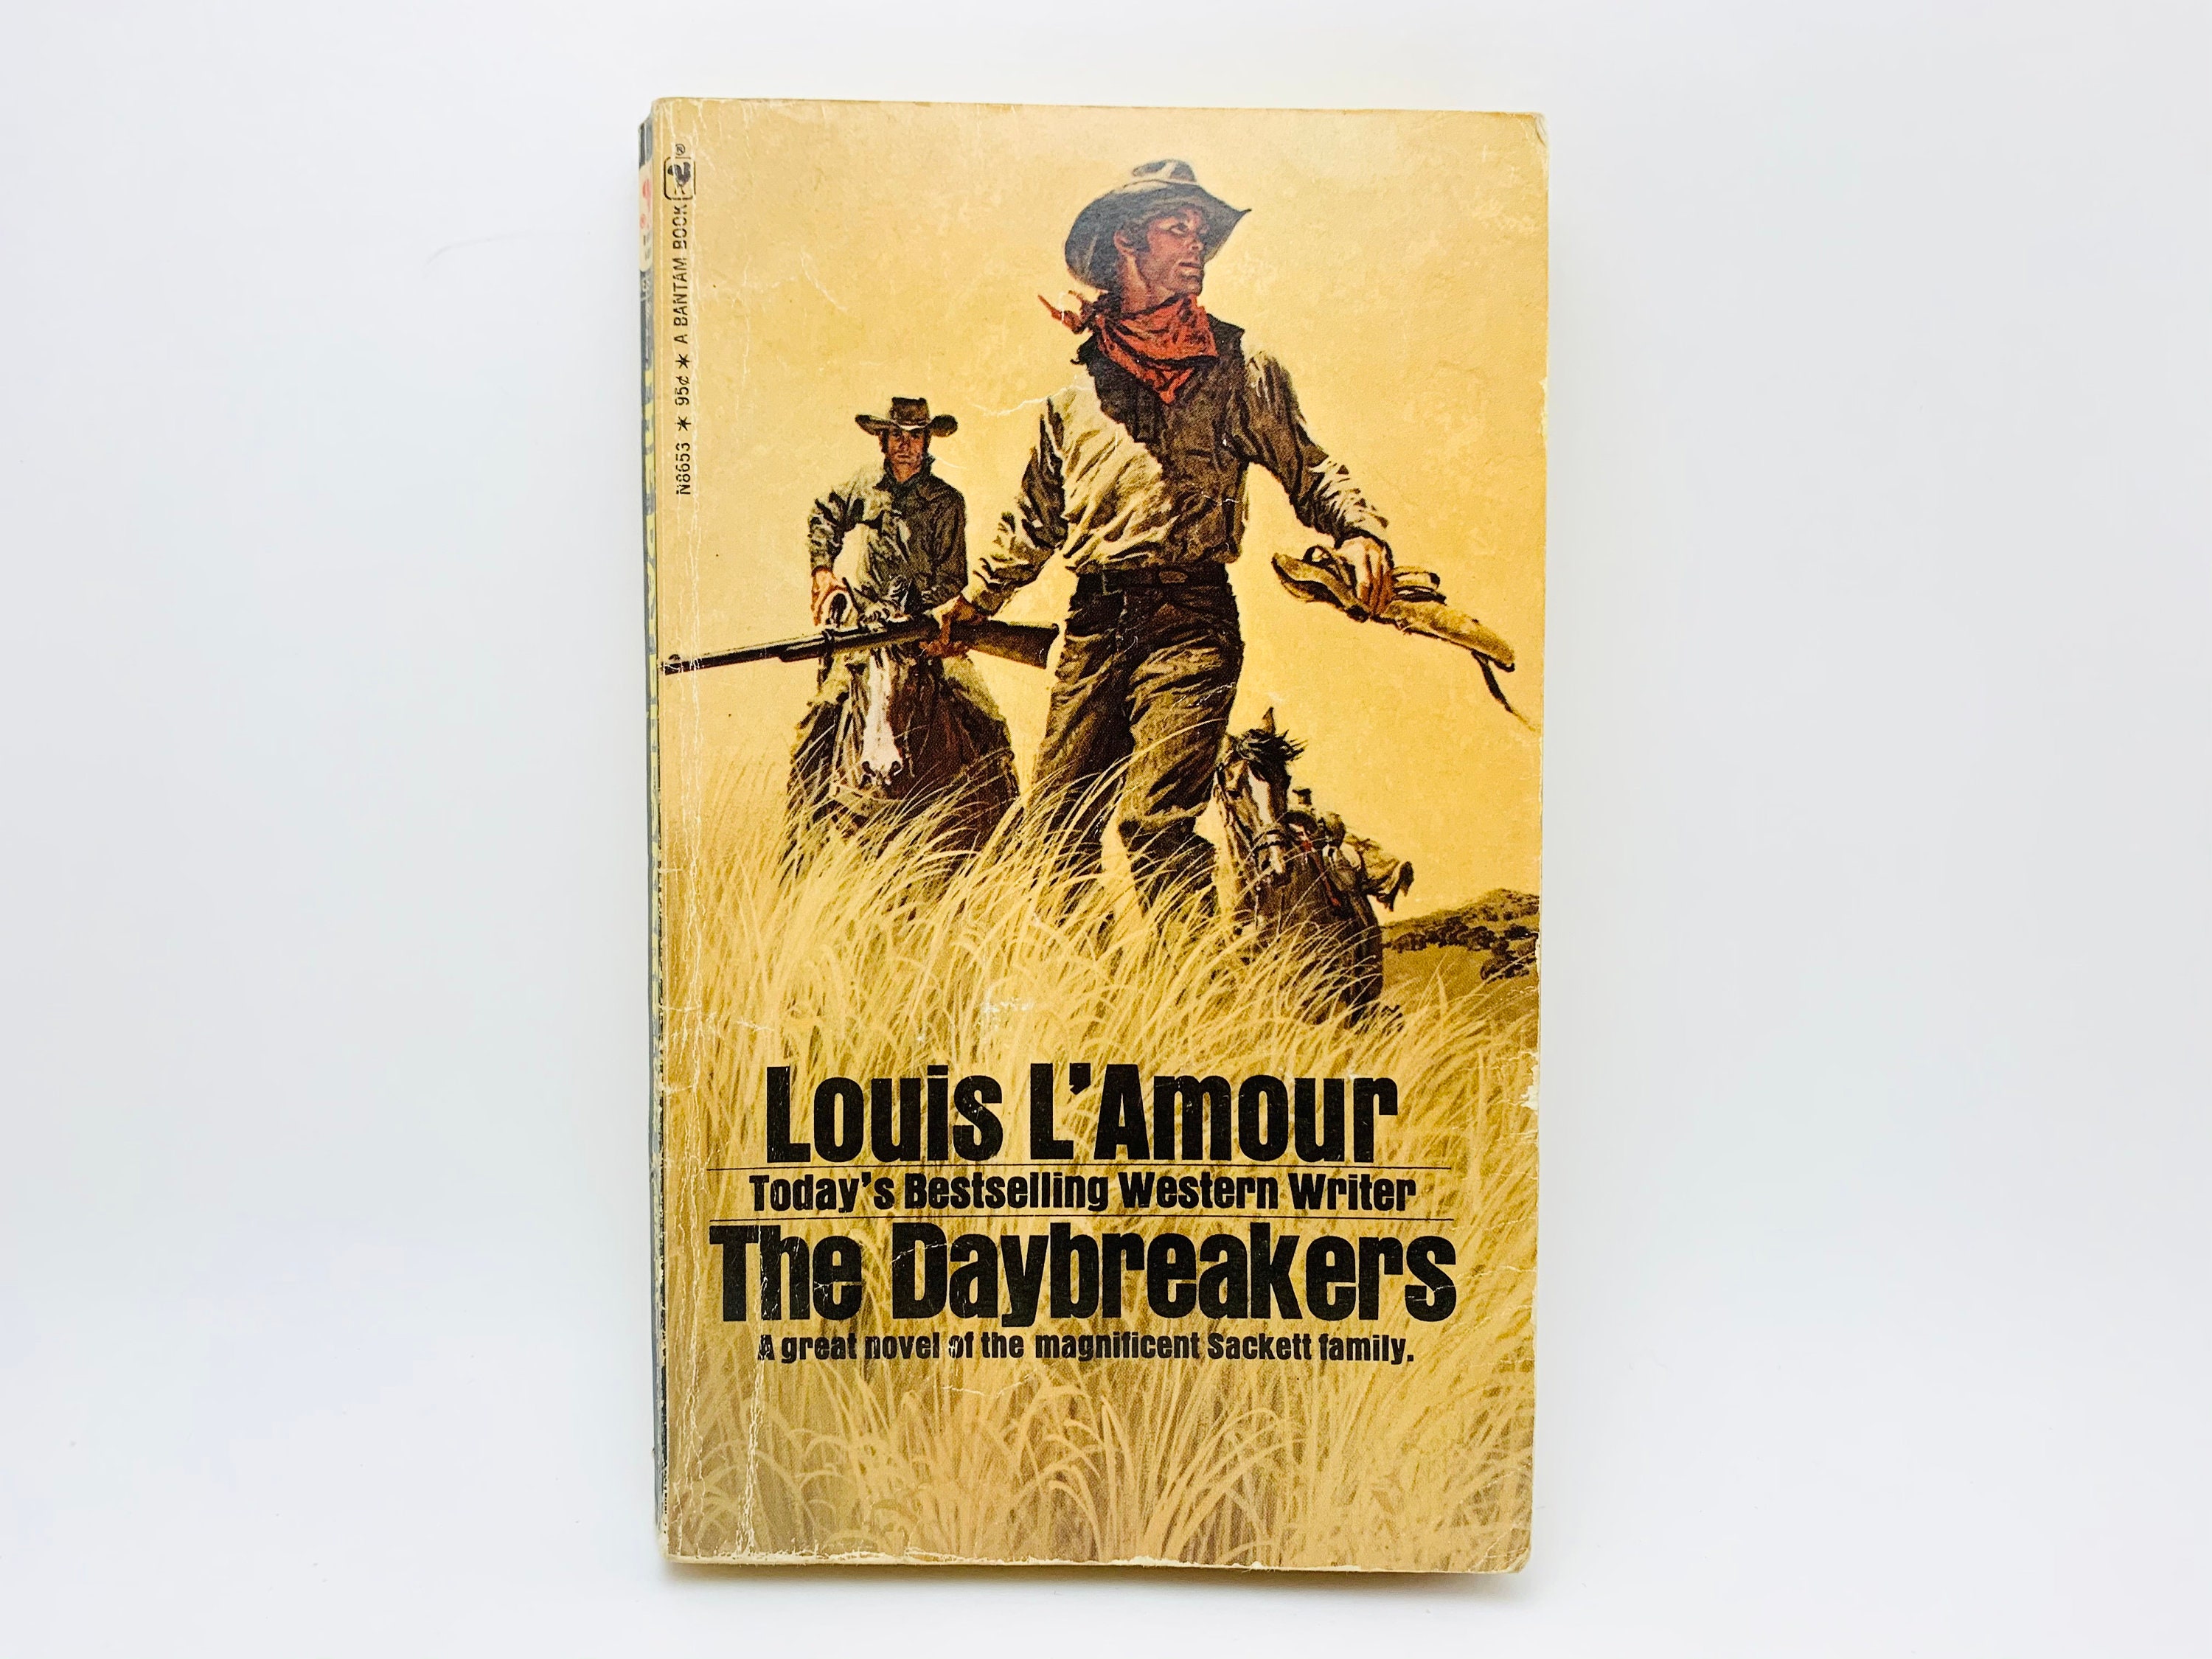 the daybreakers by louis l'amour